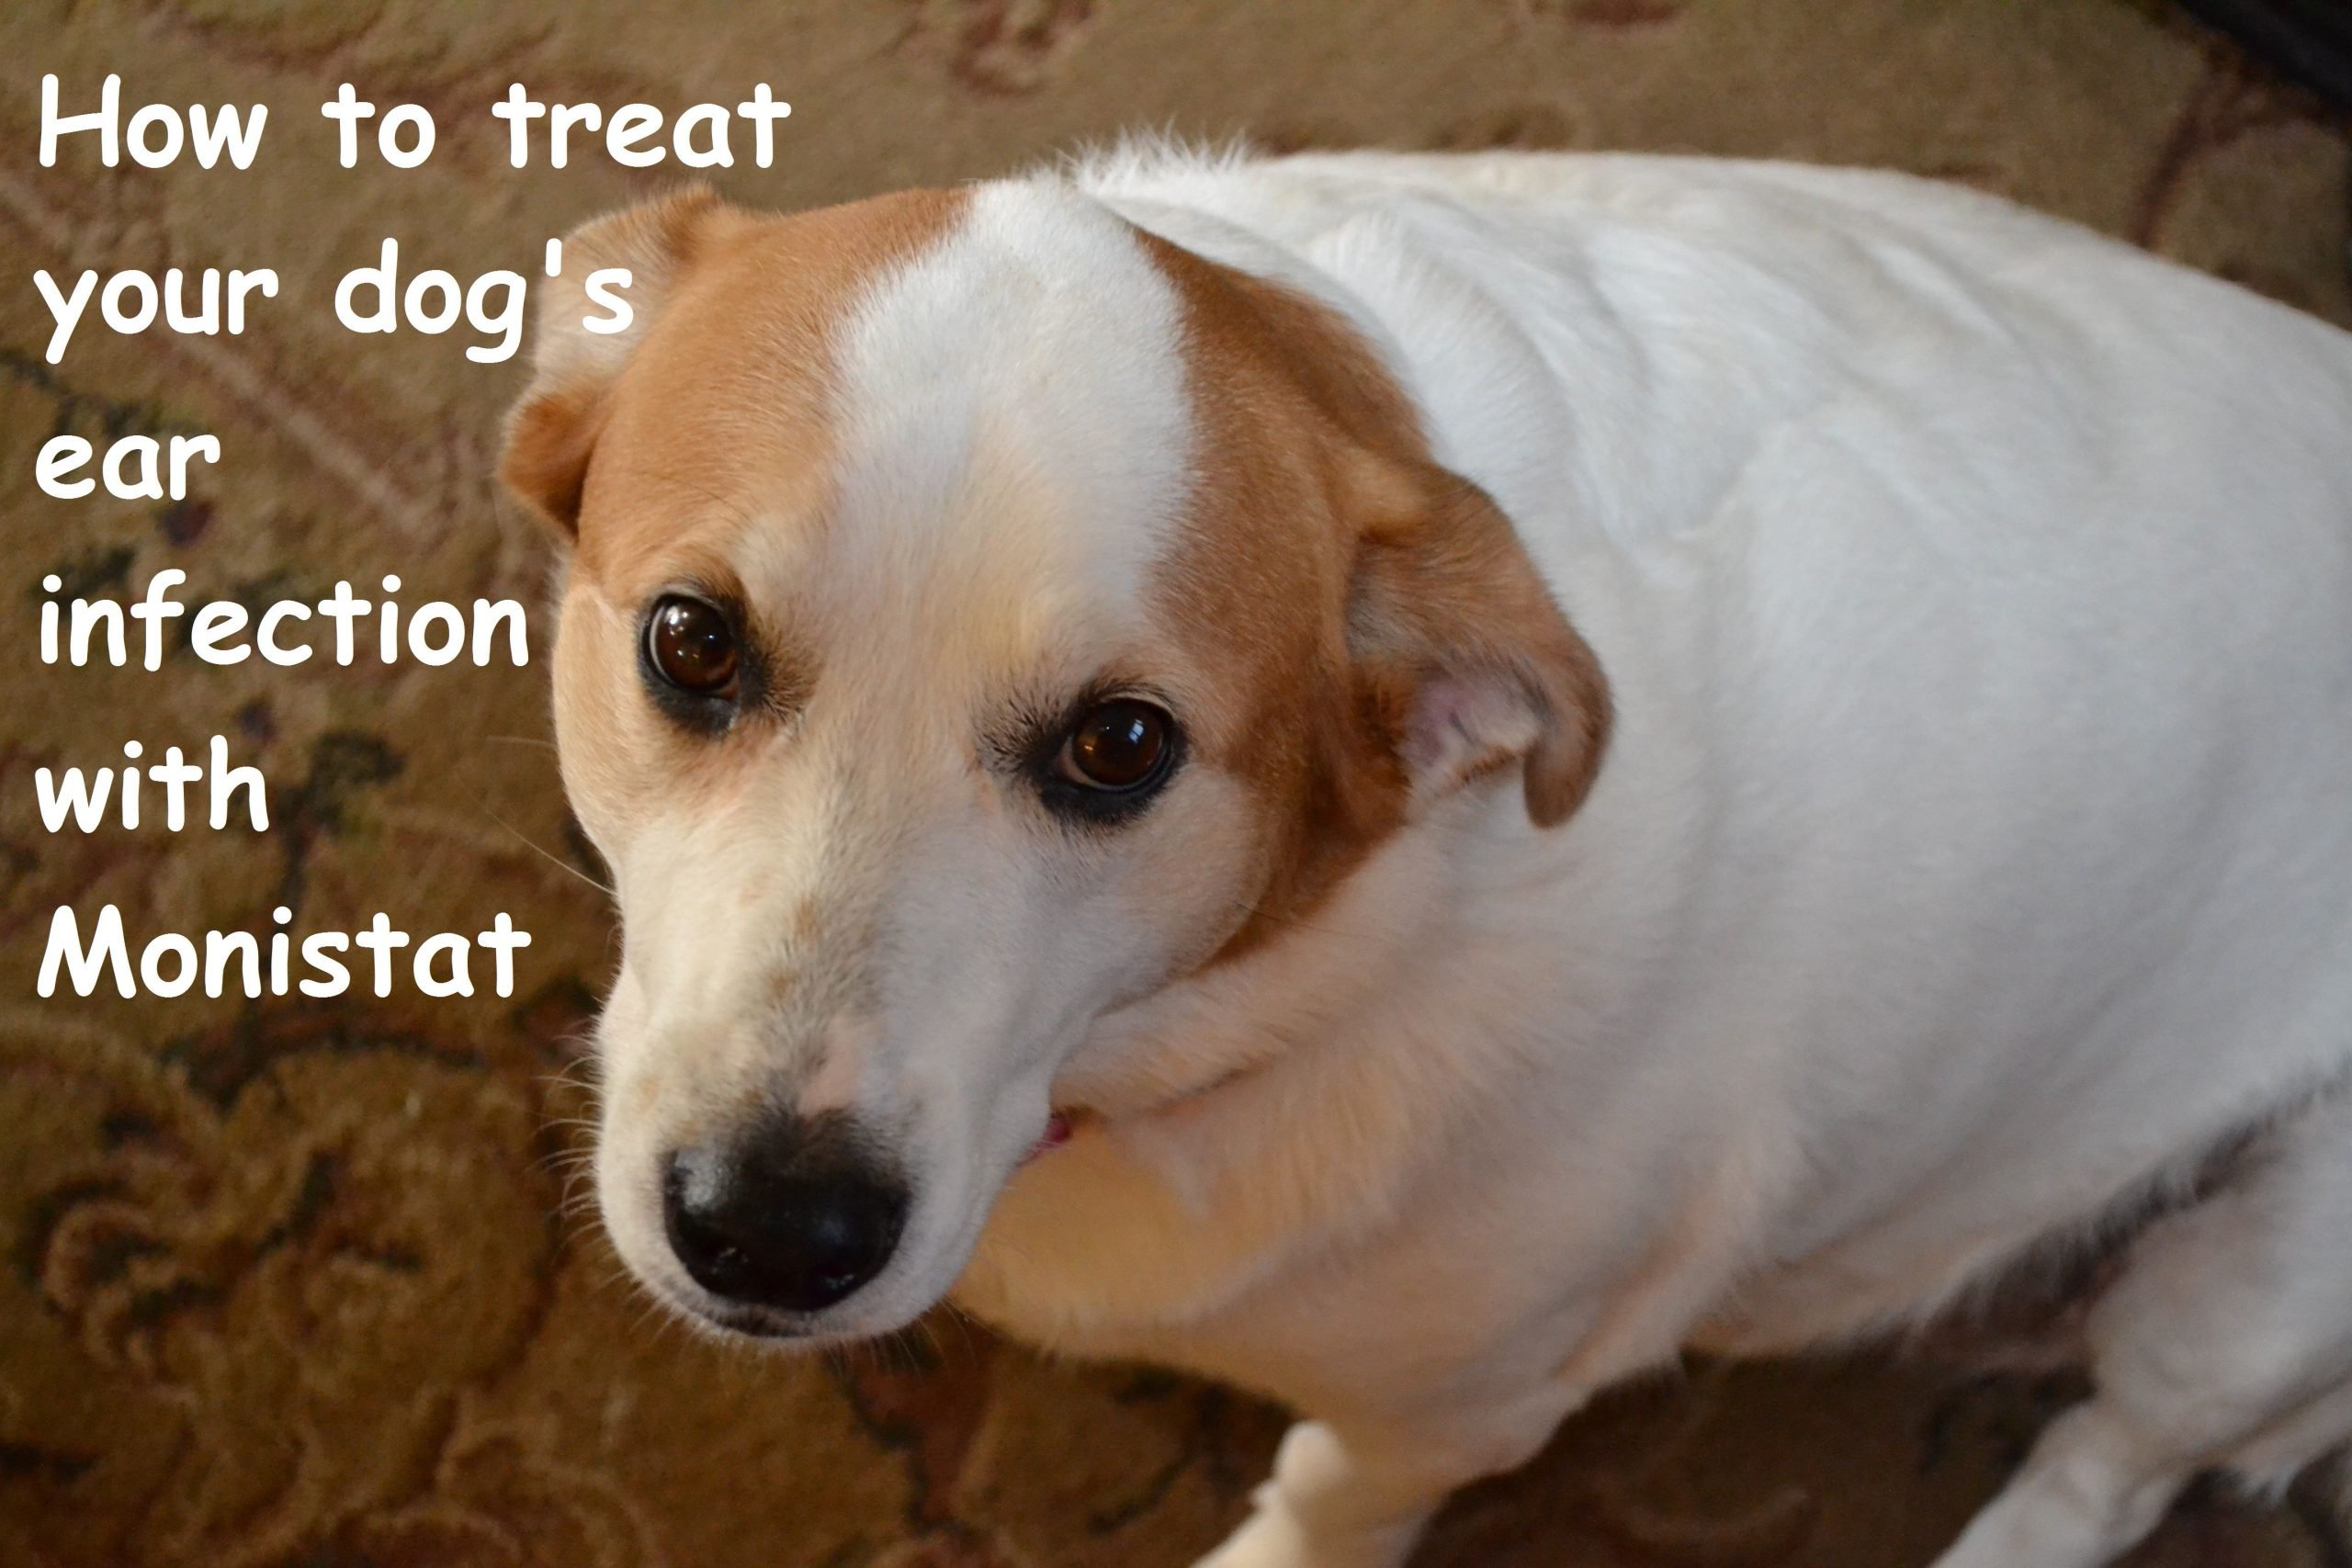 How to Treat Your Dog